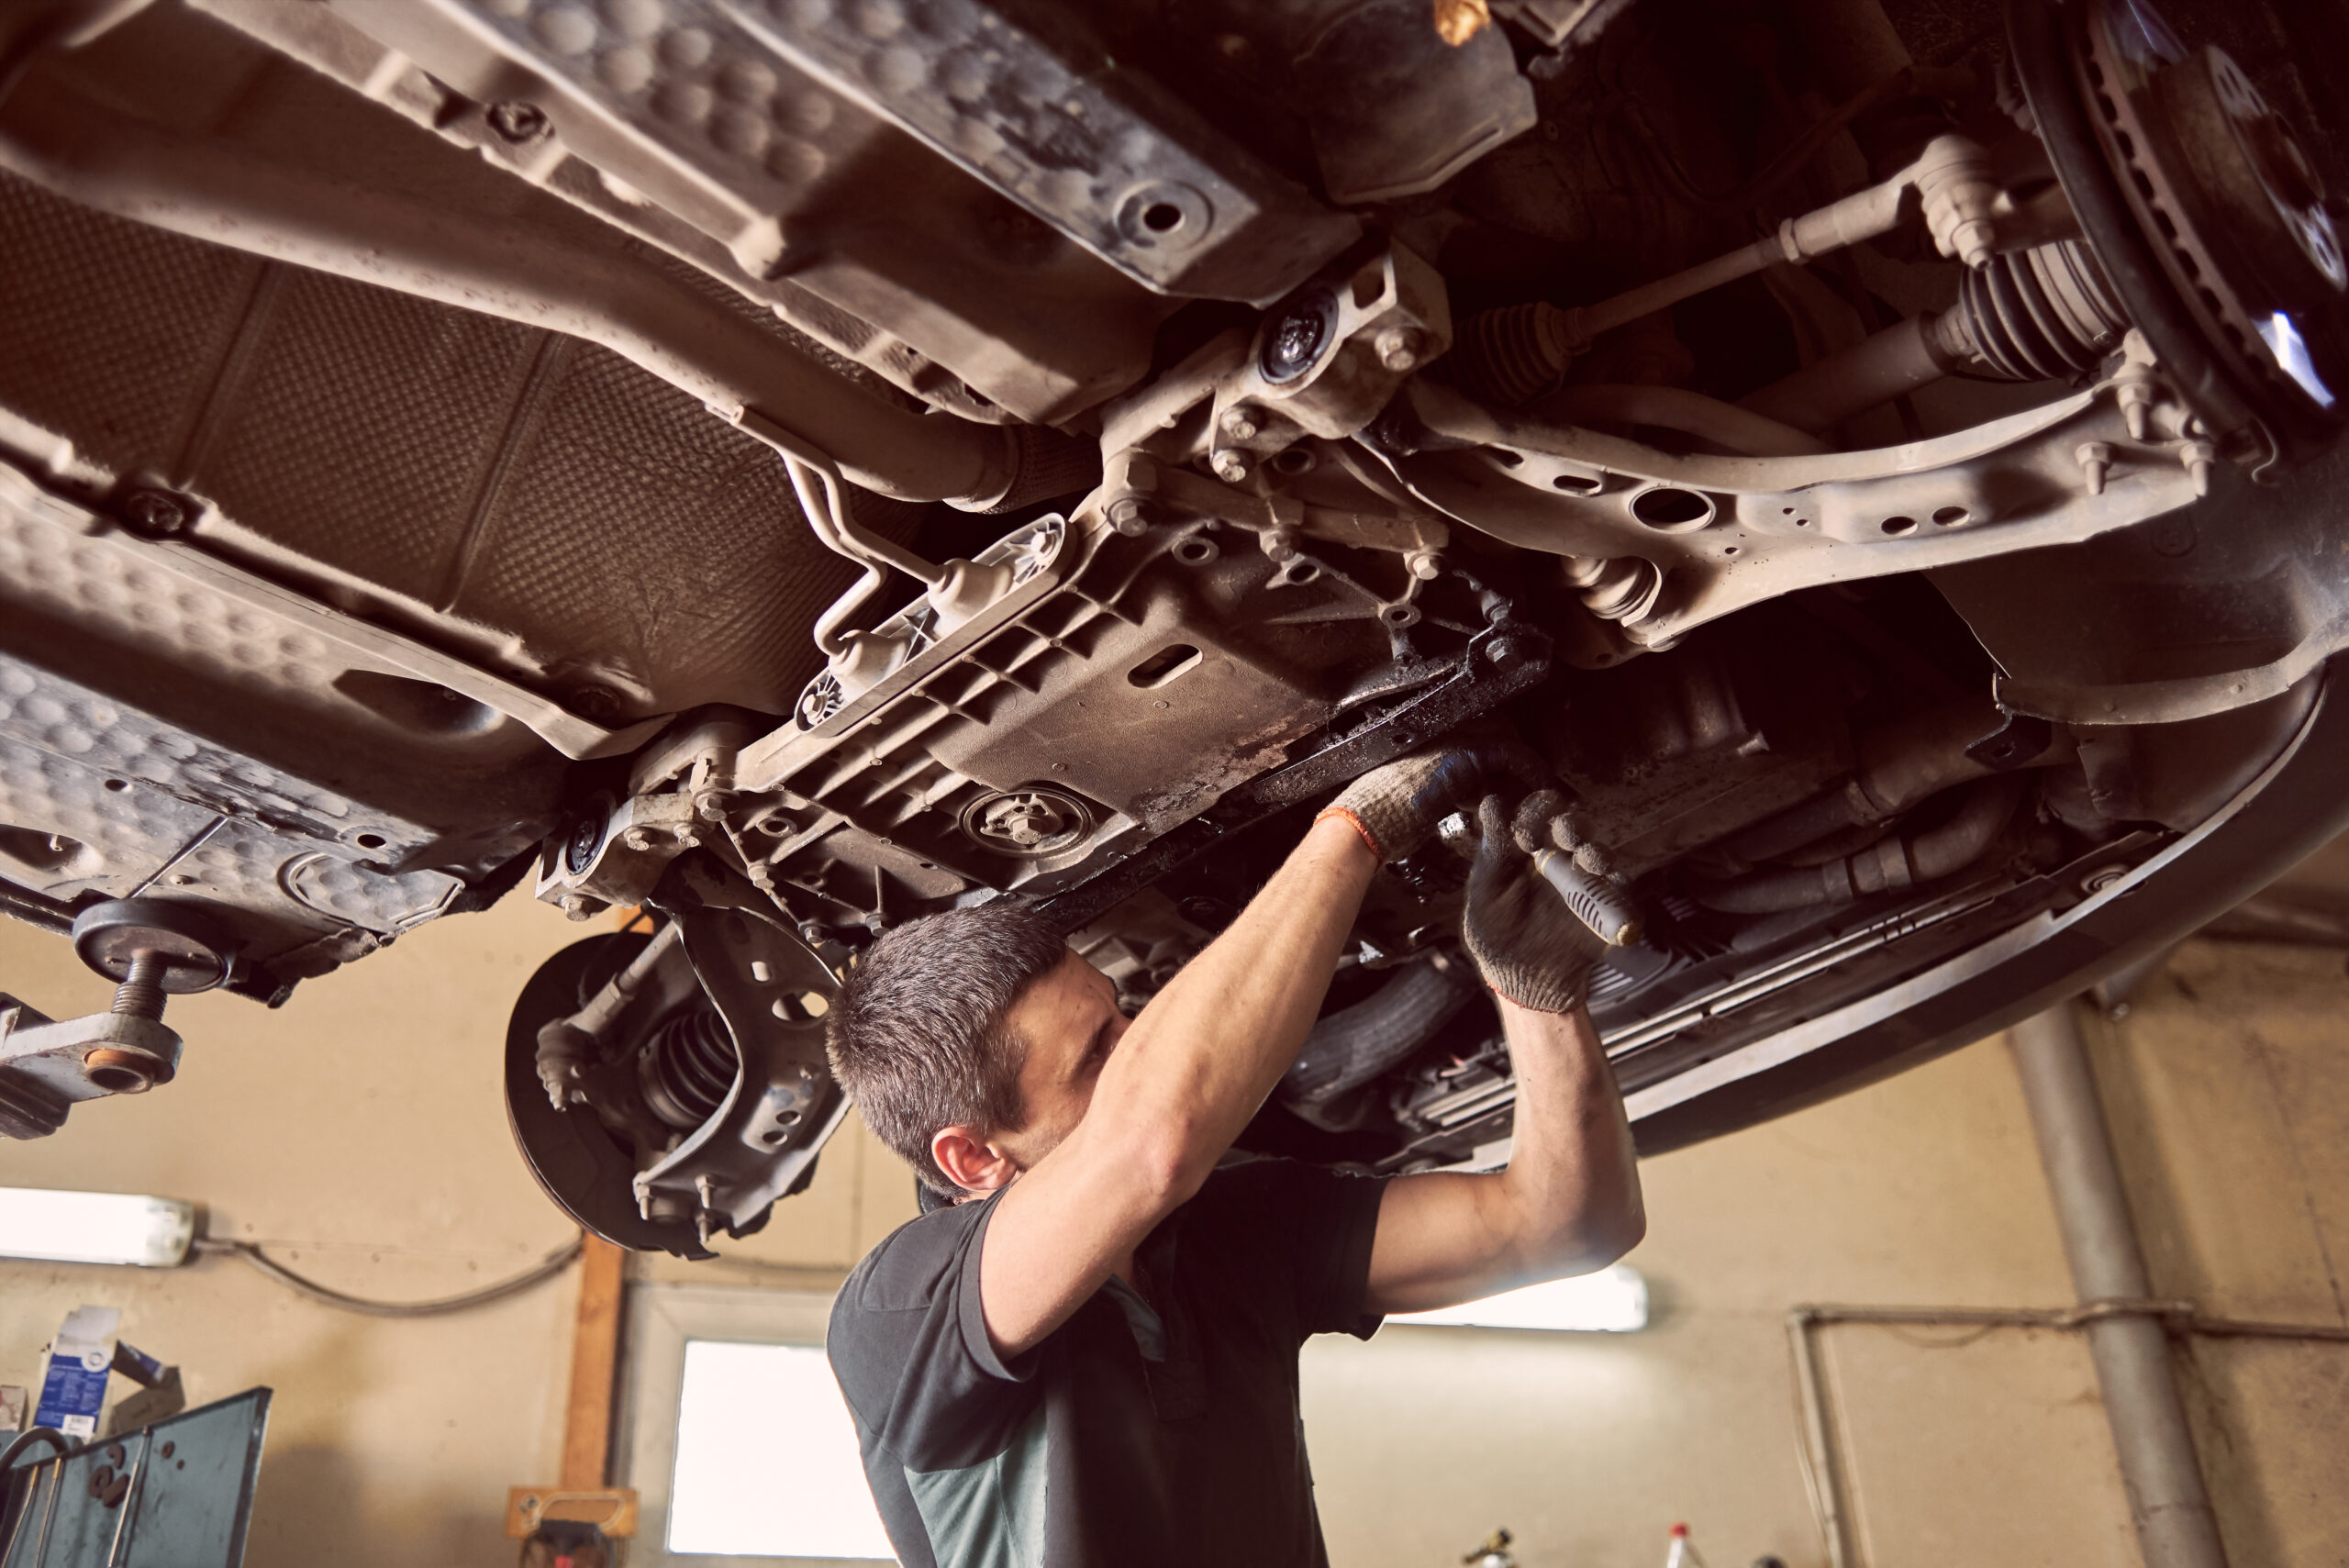 Repairman fixing car in garage. Experienced specialist car mechanic standing under lifted car during repair and maintenance process in repair station. Workshop for automobile checking up and repairing